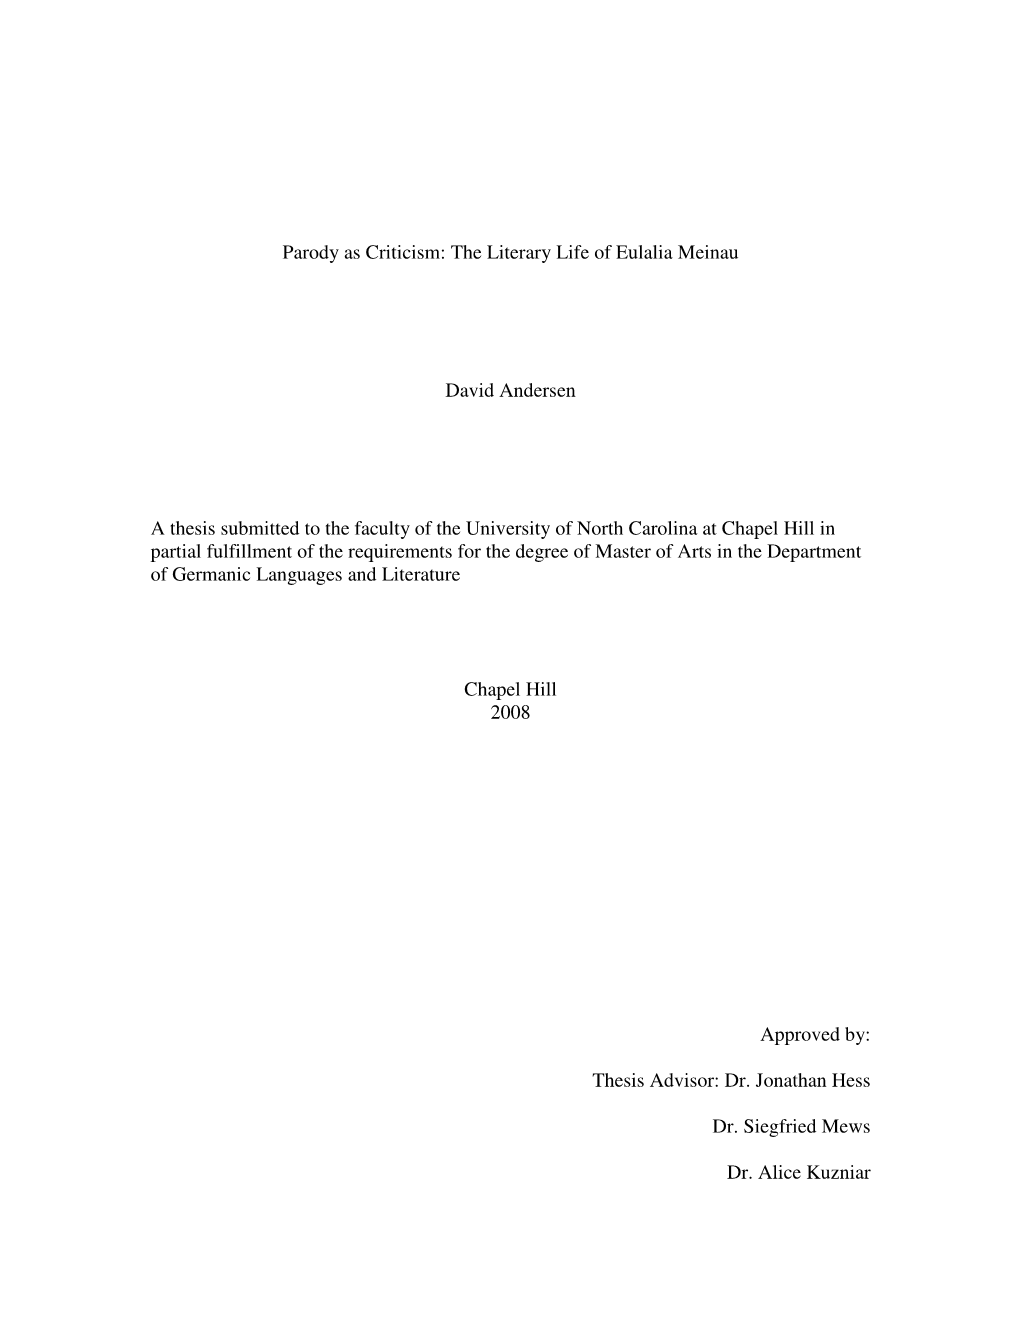 The Literary Life of Eulalia Meinau David Andersen a Thesis Submitted